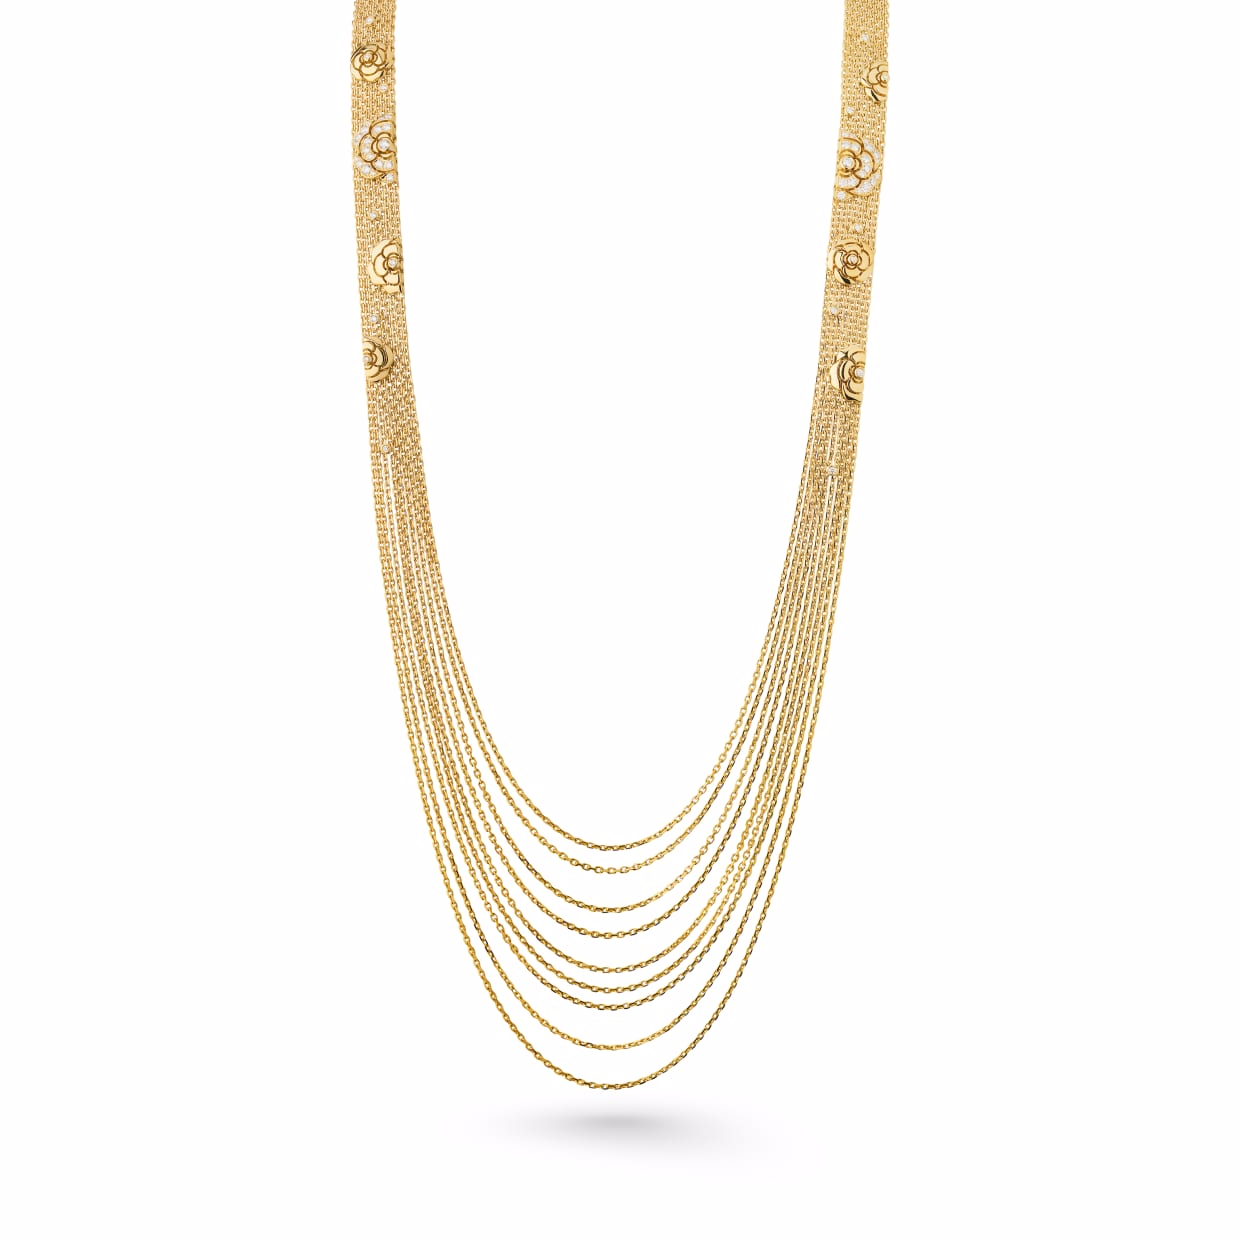 Wholesale Necklace In 18K Yellow Gold And Diamonds